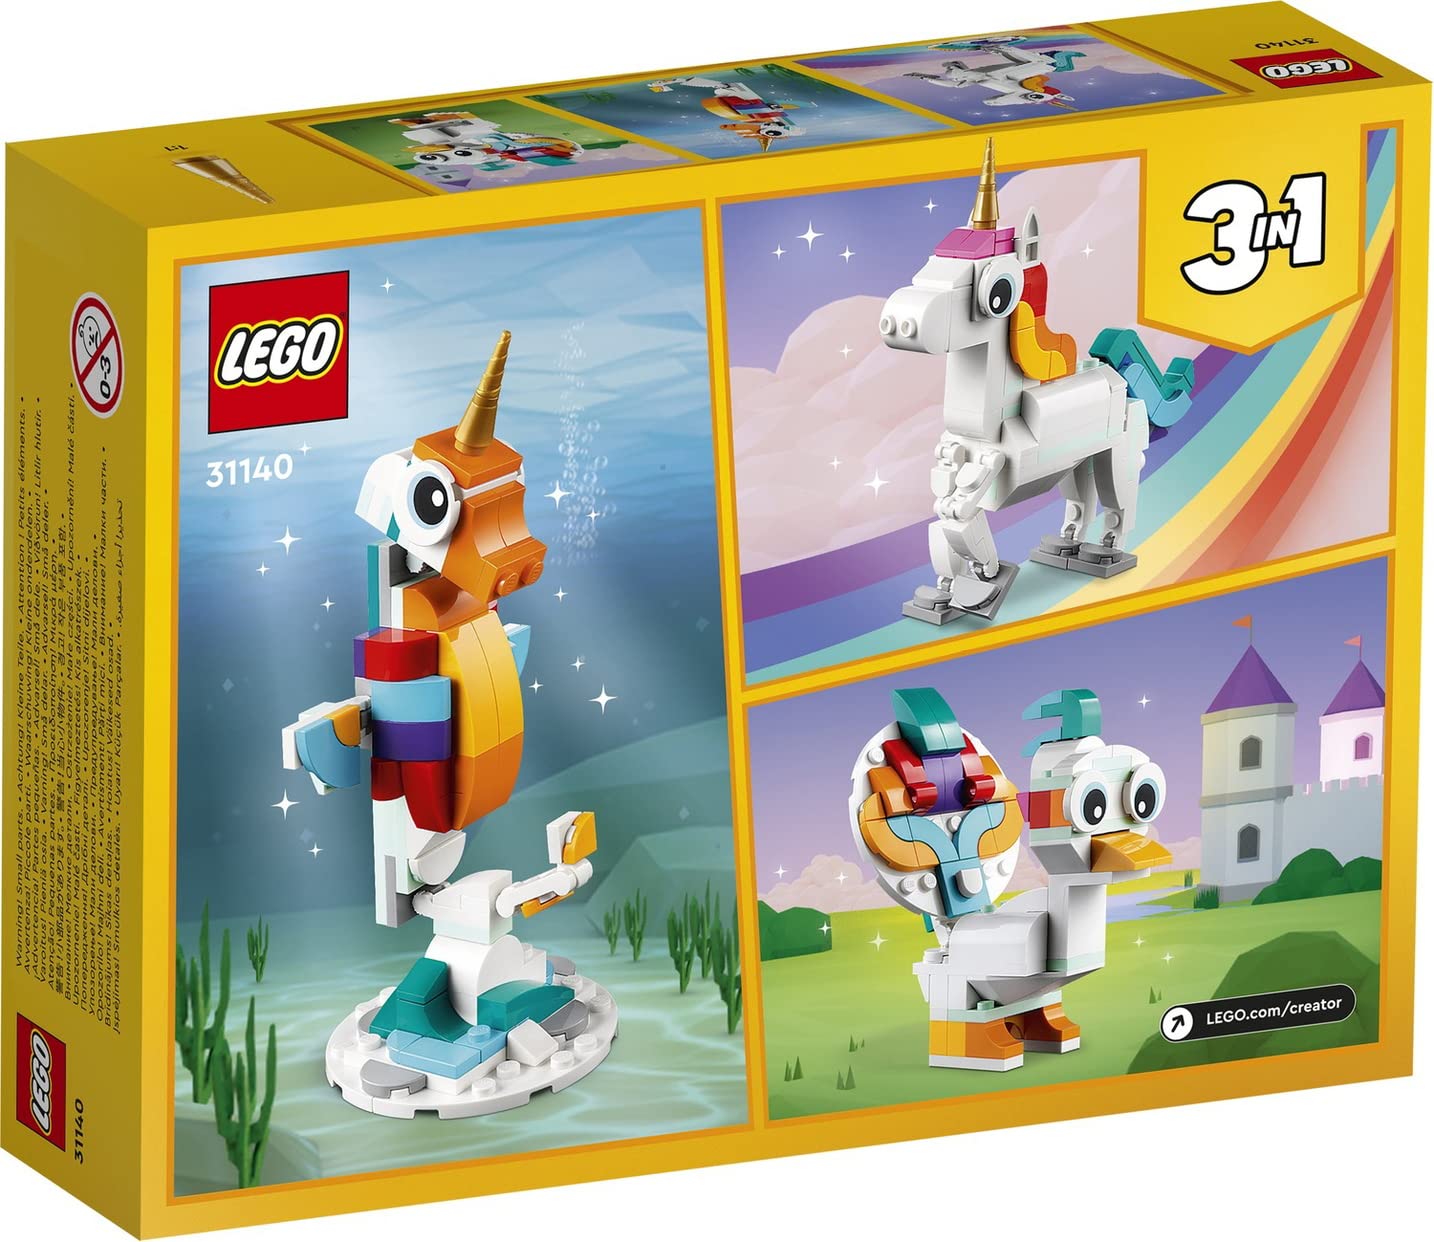 LEGO Creator 3in1 Magical Unicorn Building Kit for Ages 7+